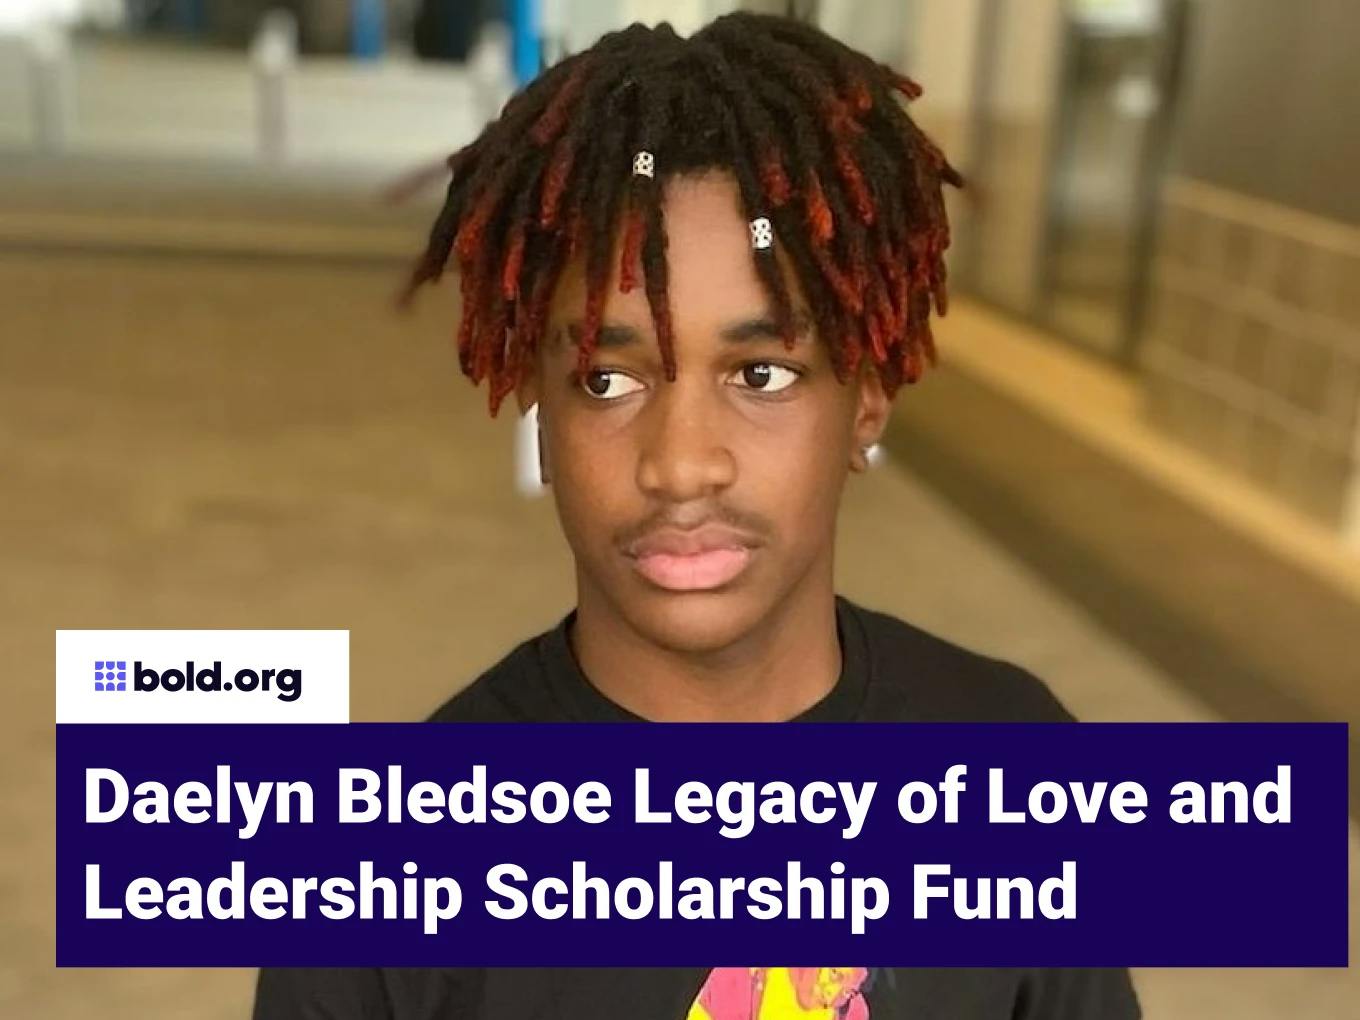 Daelyn Bledsoe Legacy of Love and Leadership Scholarship Fund